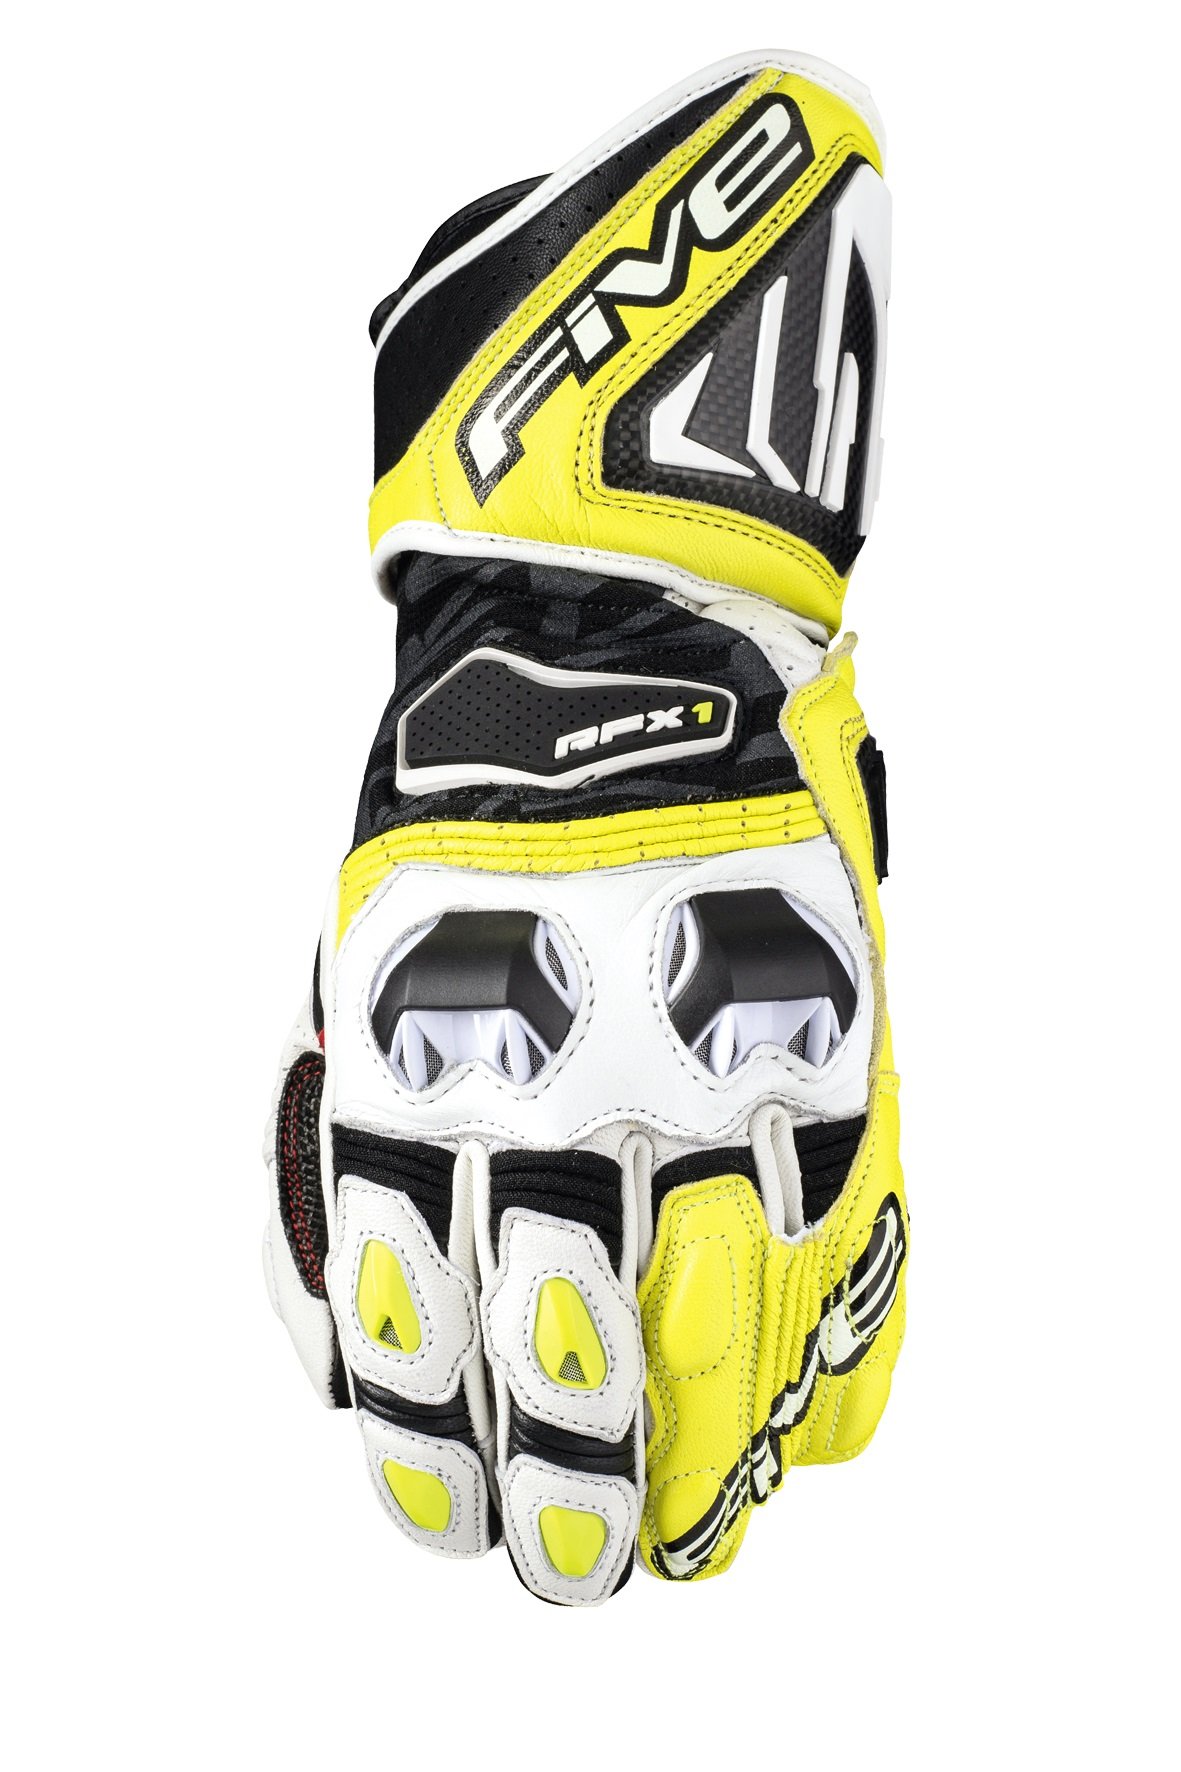 Image of Five RFX1 White Yellow Fluo Size 3XL ID 3882012301866